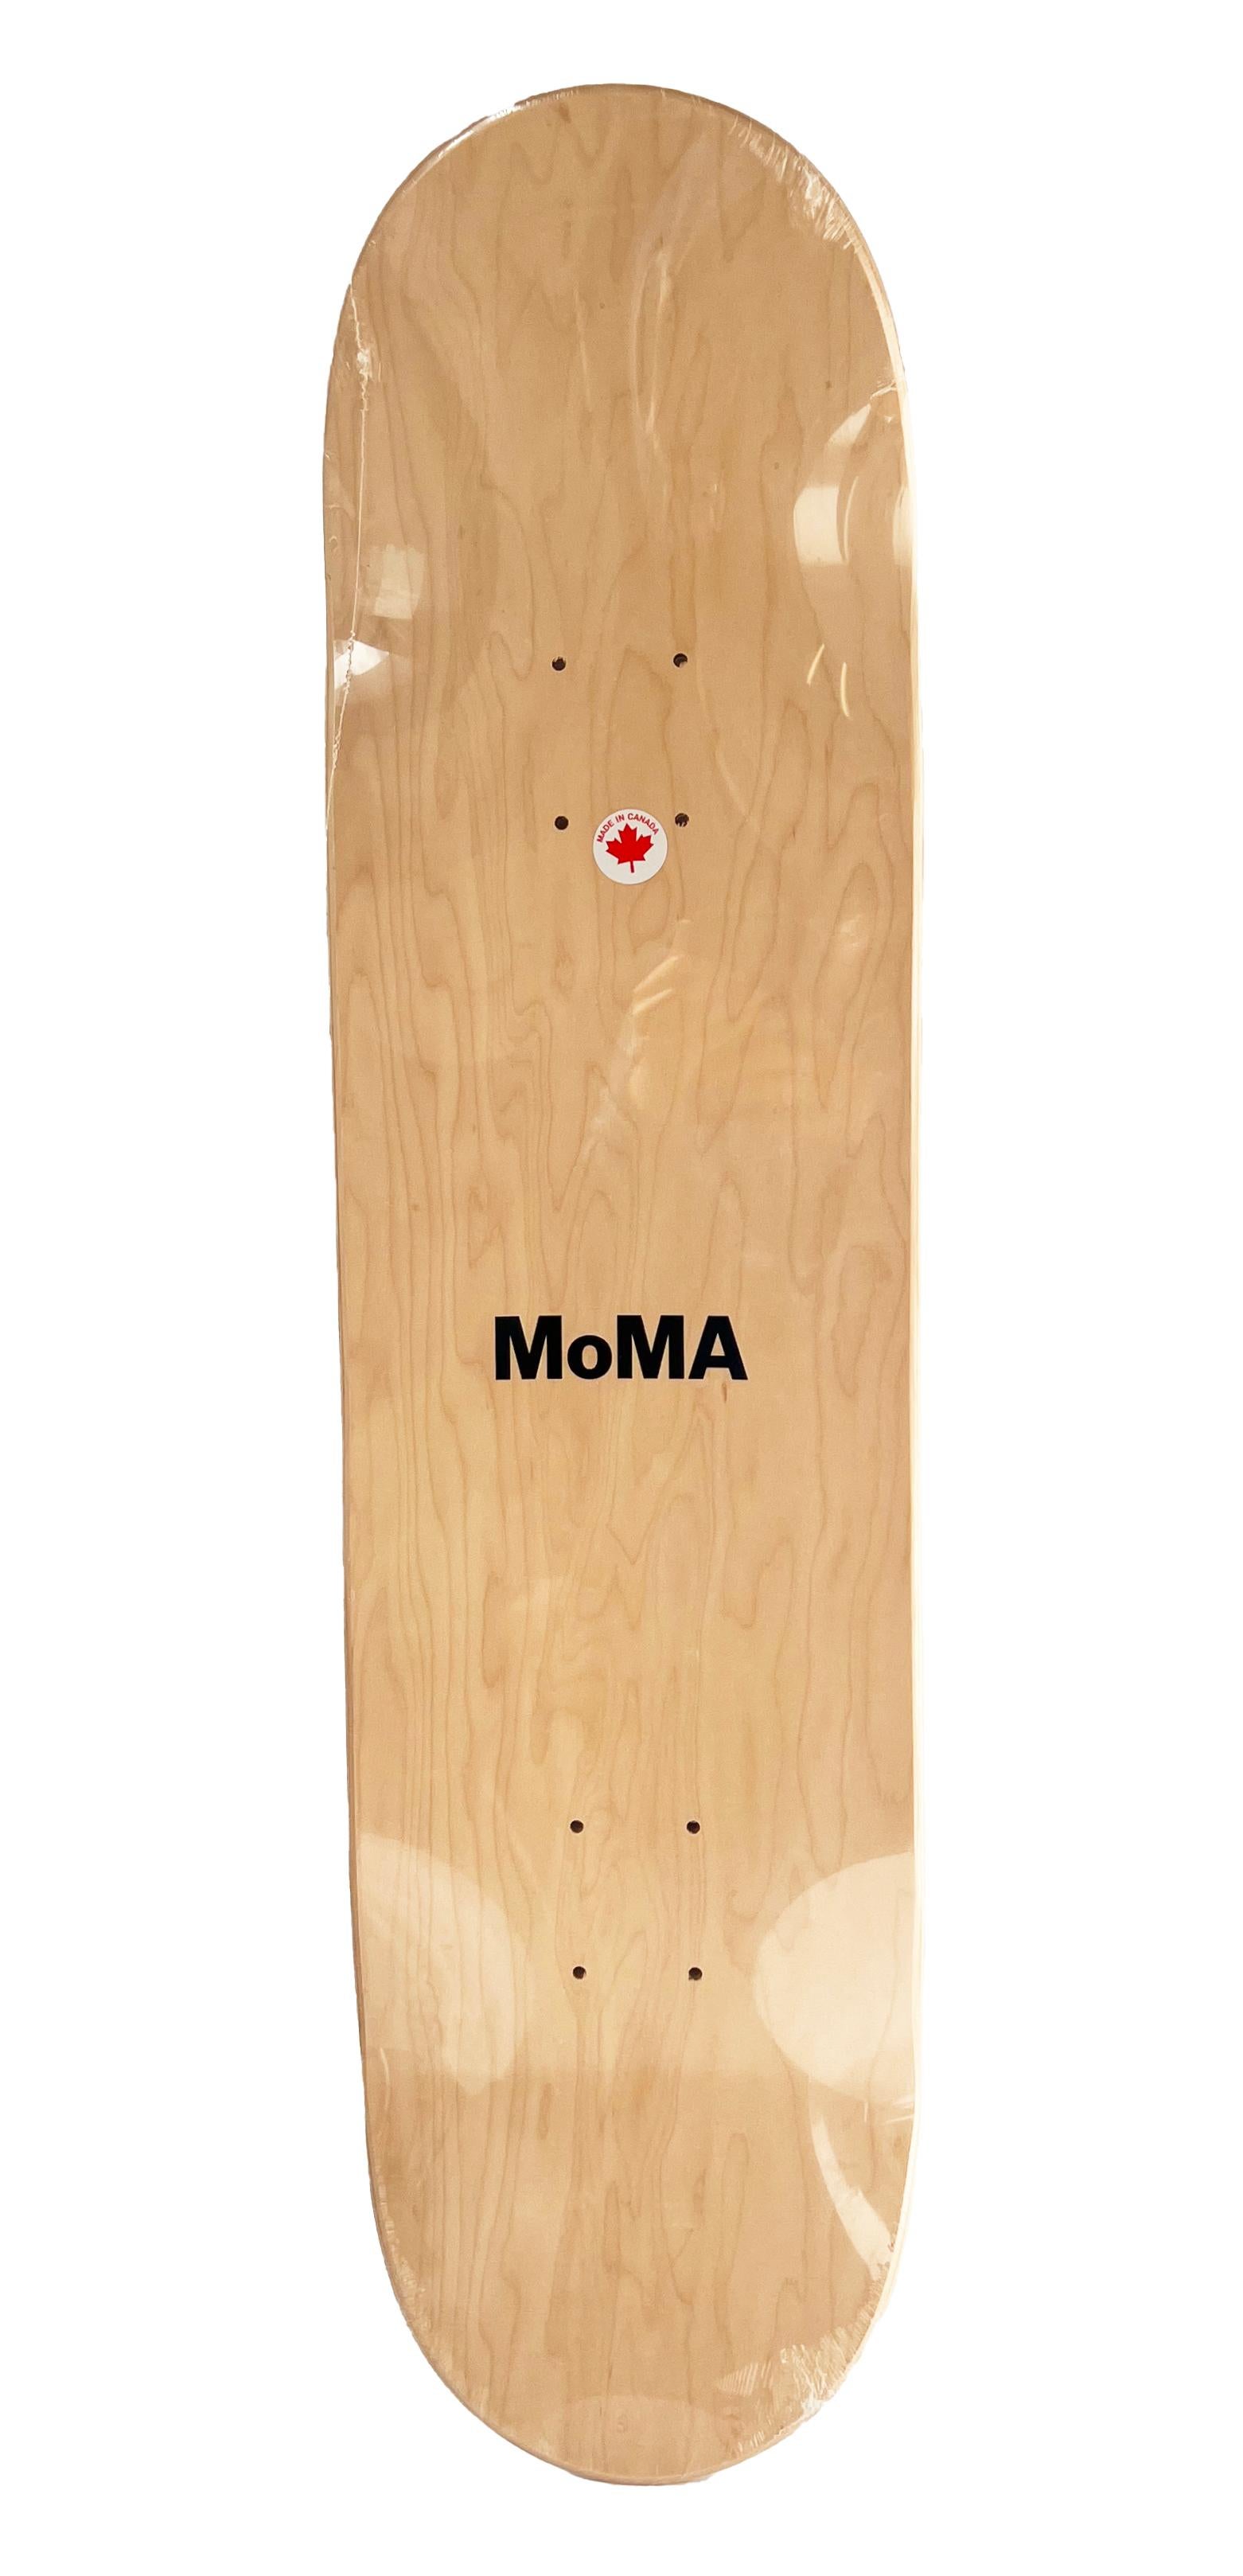 Yoshitomo Nara Skateboard Deck:
This Yoshitomo Nara skateboard deck was created in c. 2017 under the supervision of Nara featuring his 'Welcome Girl'. Makes for standout Nara wall art that hangs with ease. Published by MoMa New York. The work is